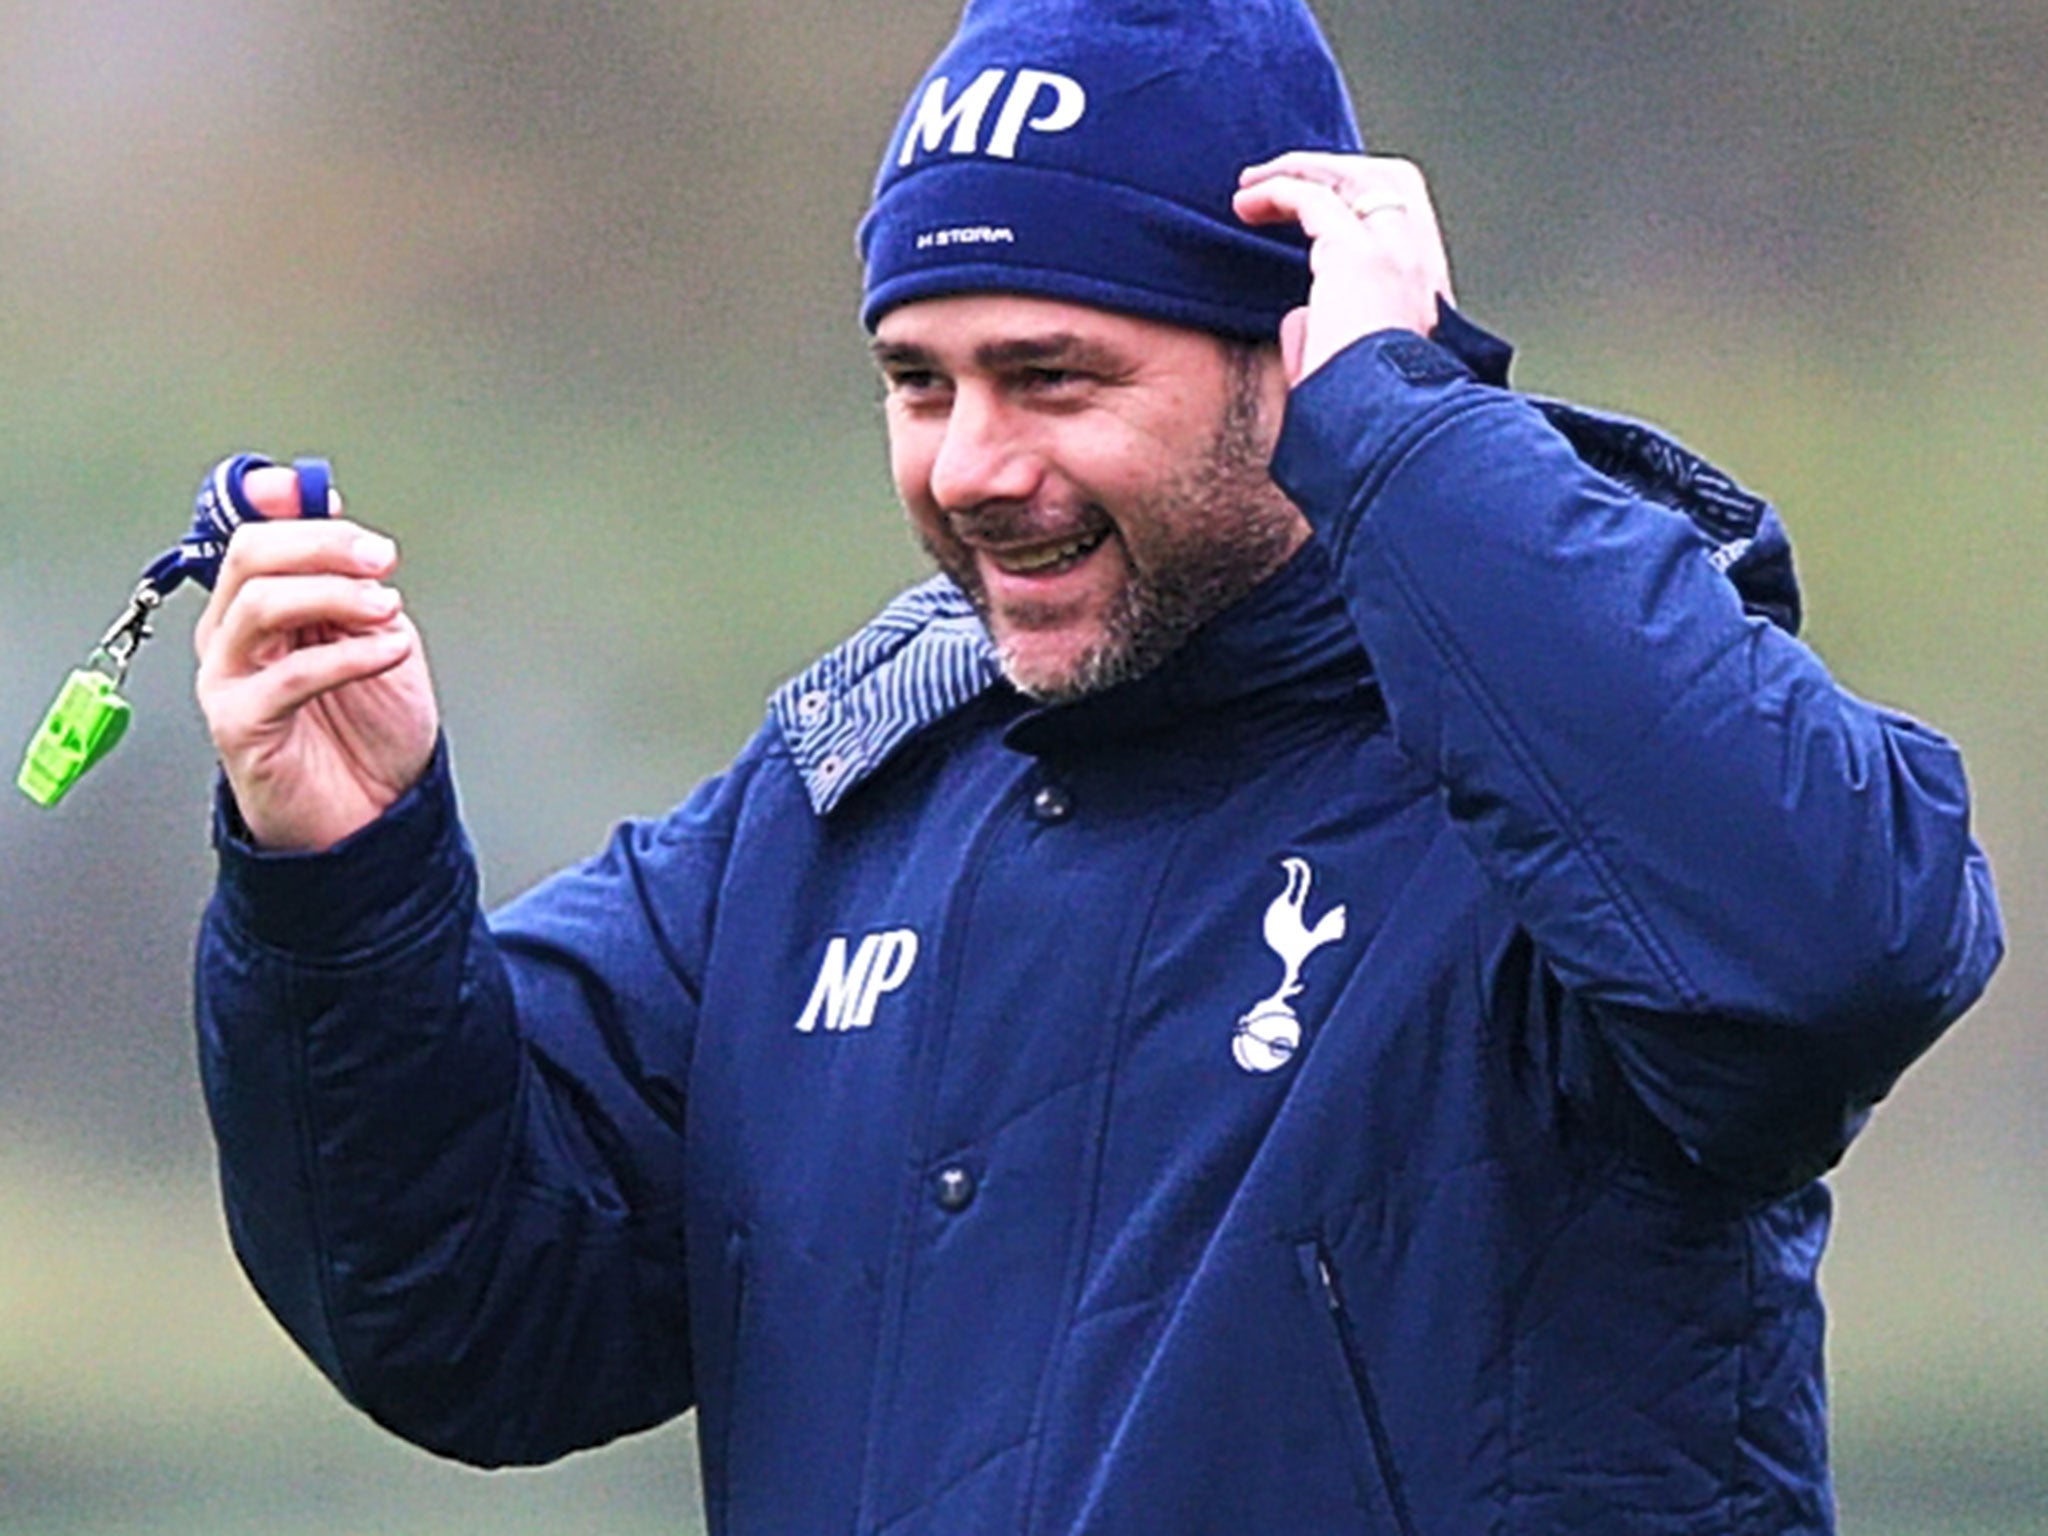 Mauricio Pochettino says Spurs are heading in right direction